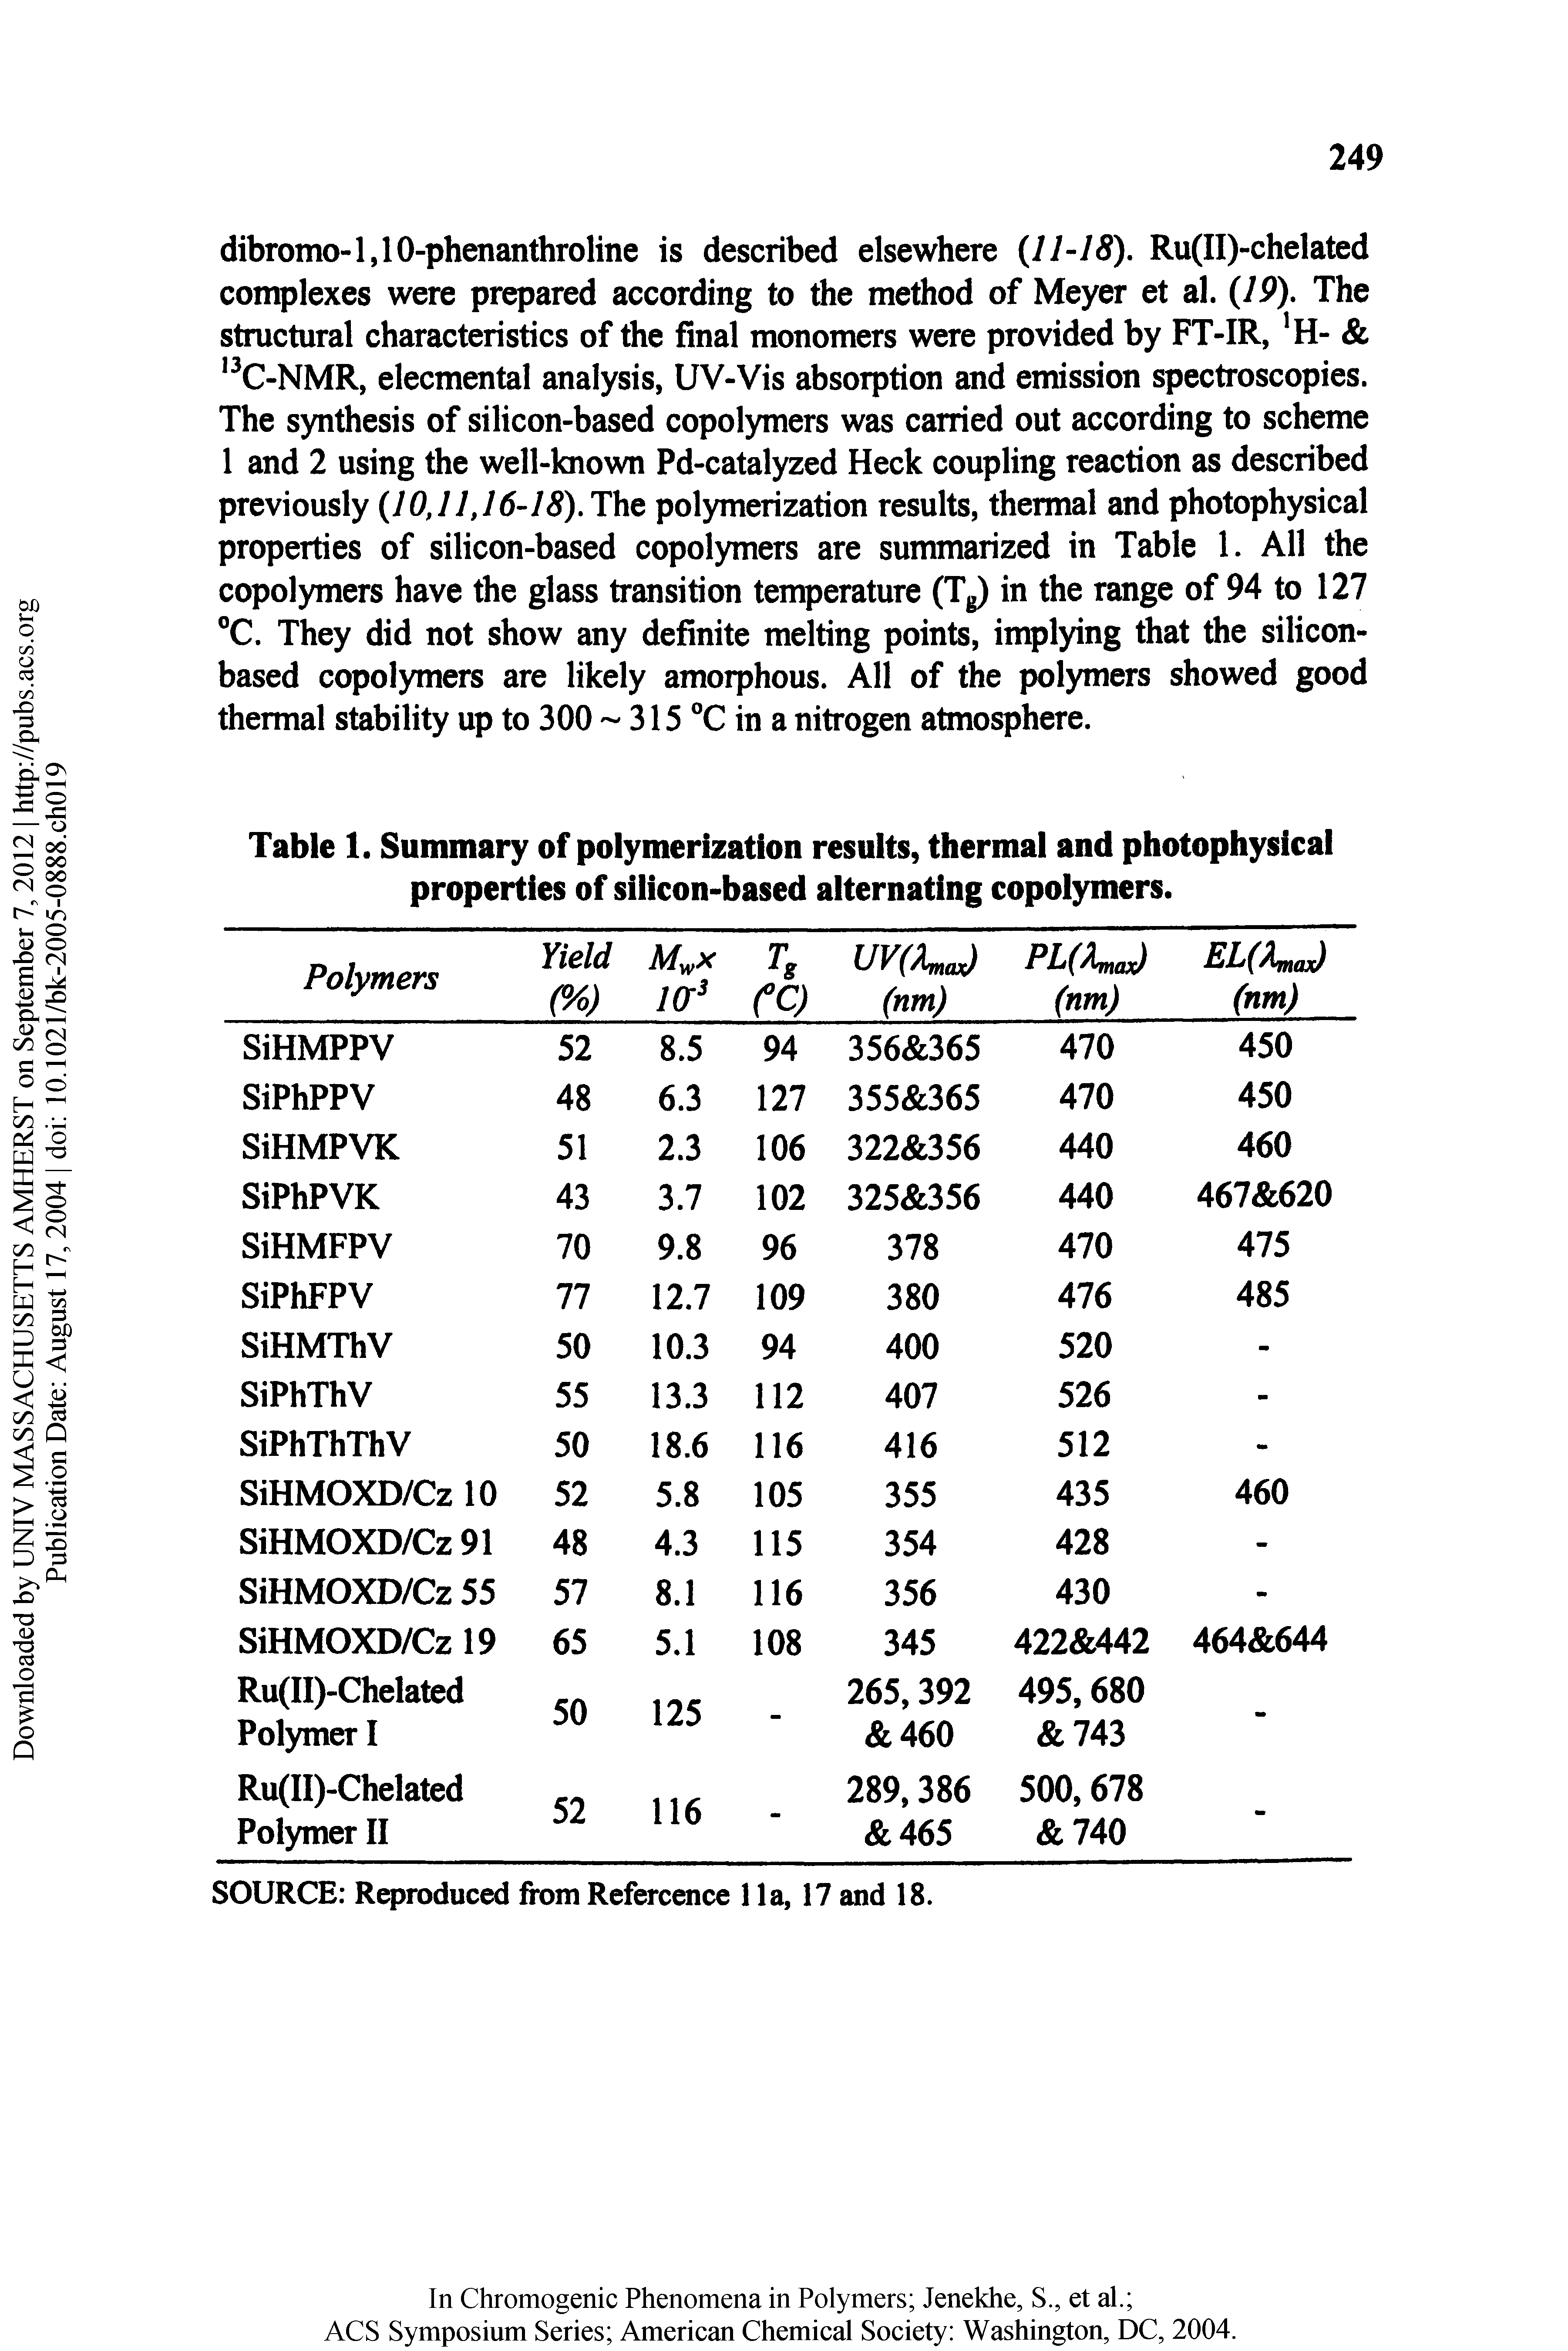 Table 1. Summary of polymerization results, thermal and photophysical properties of silicon-based alternating copolymers.